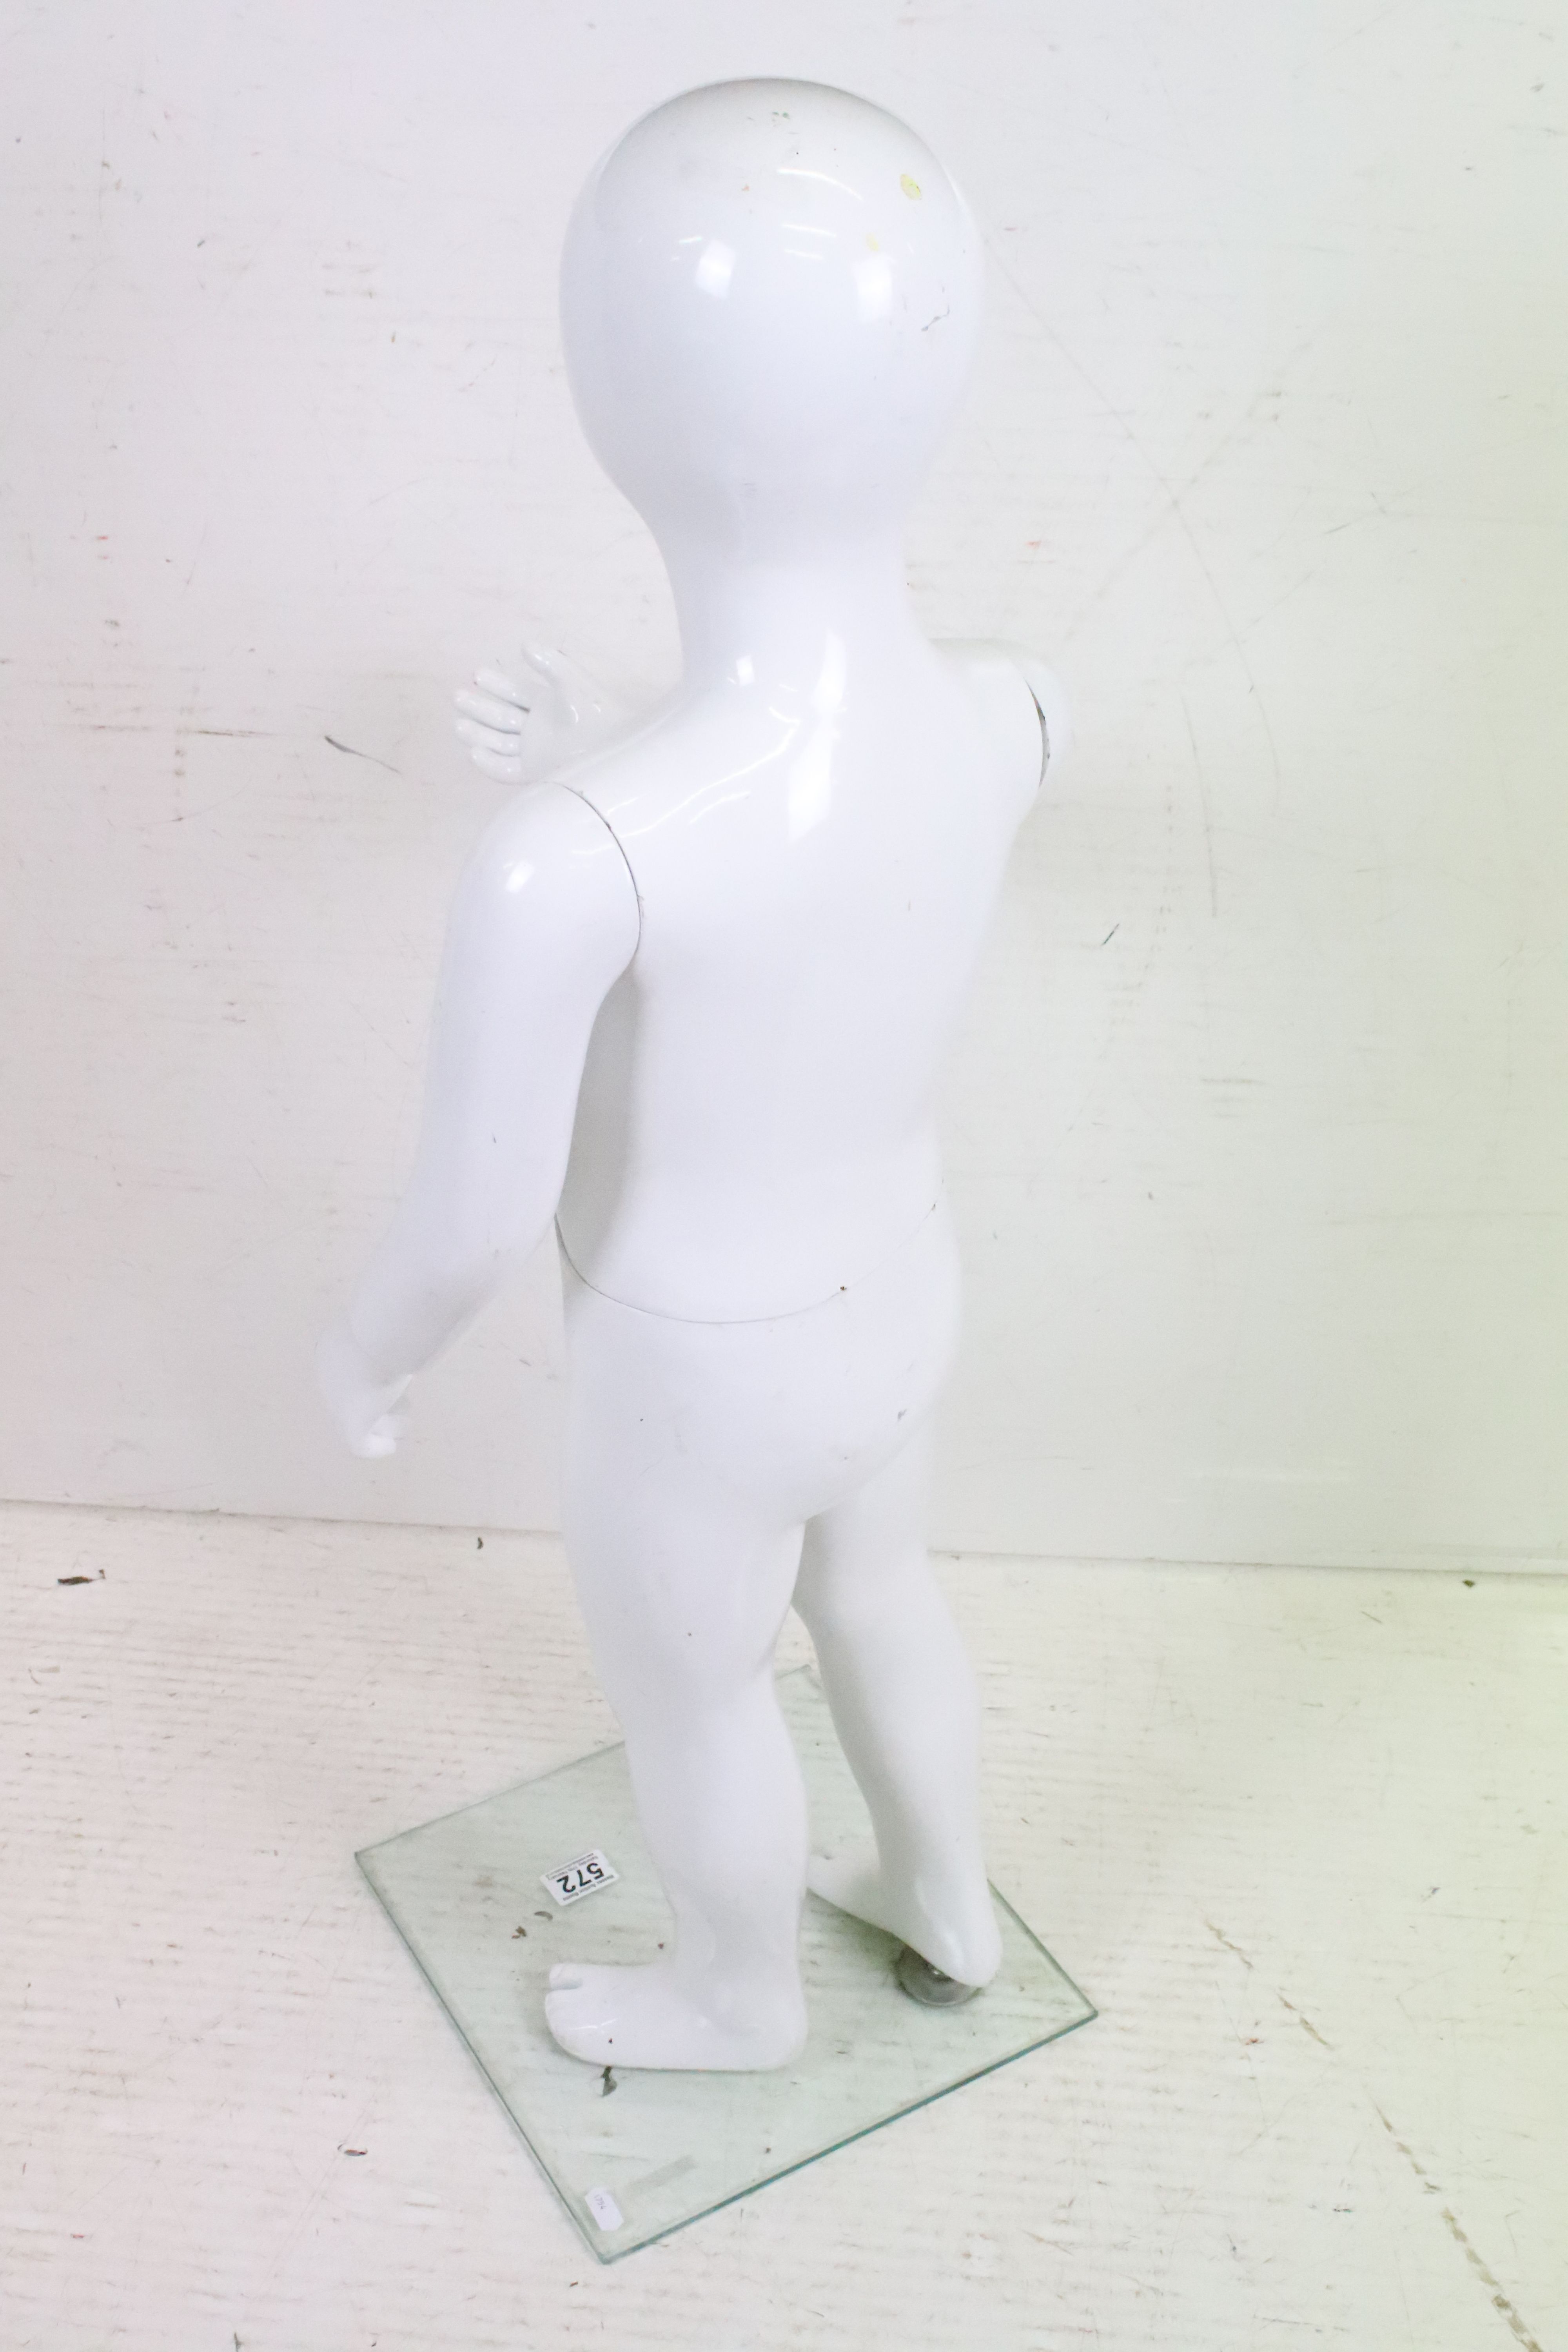 Child Full Size Shop Display Mannequin with plain white finish held on a clear square glass stand, - Image 2 of 4